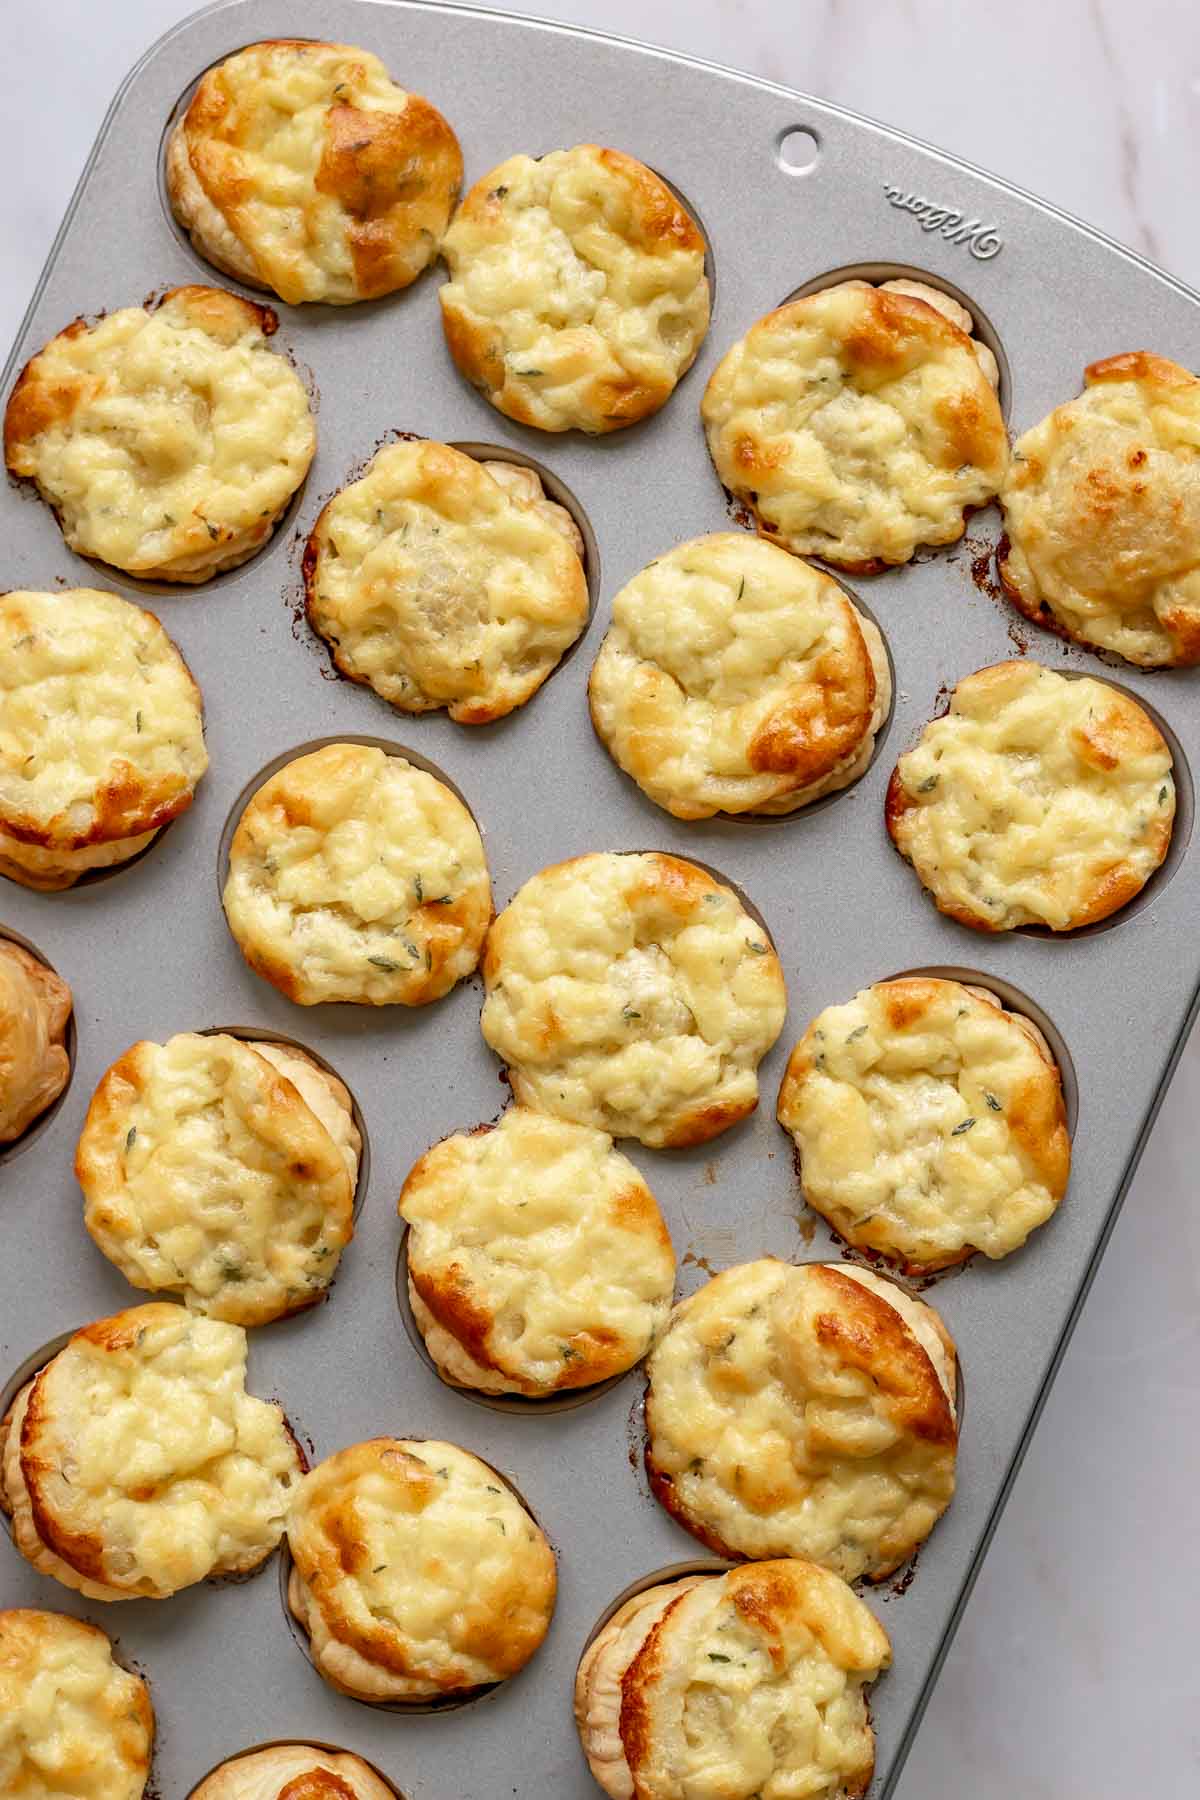 Puffed up, baked cheese tartlets in a muffin tin.